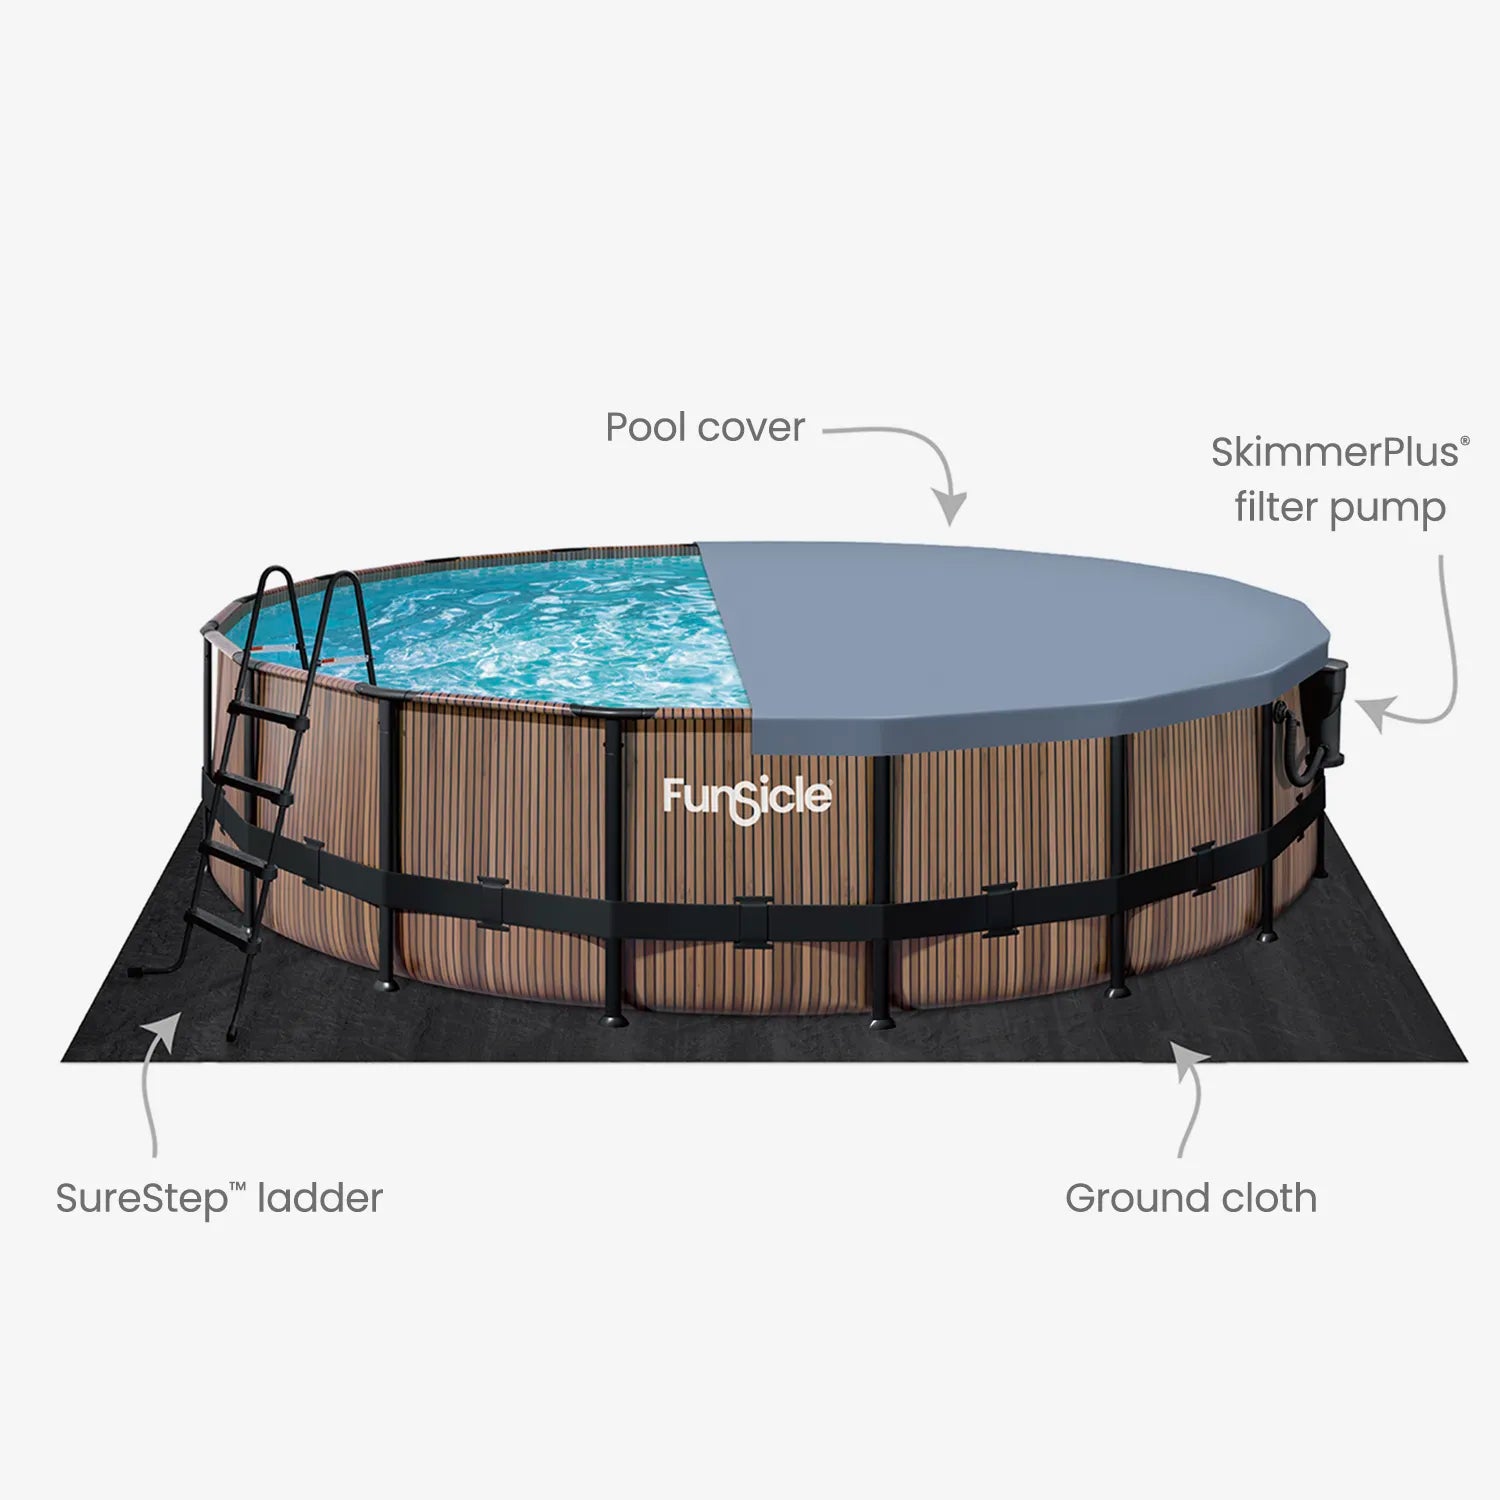  Funsicle 18 ft Oasis Designer Pool - Natural Teak with callout features